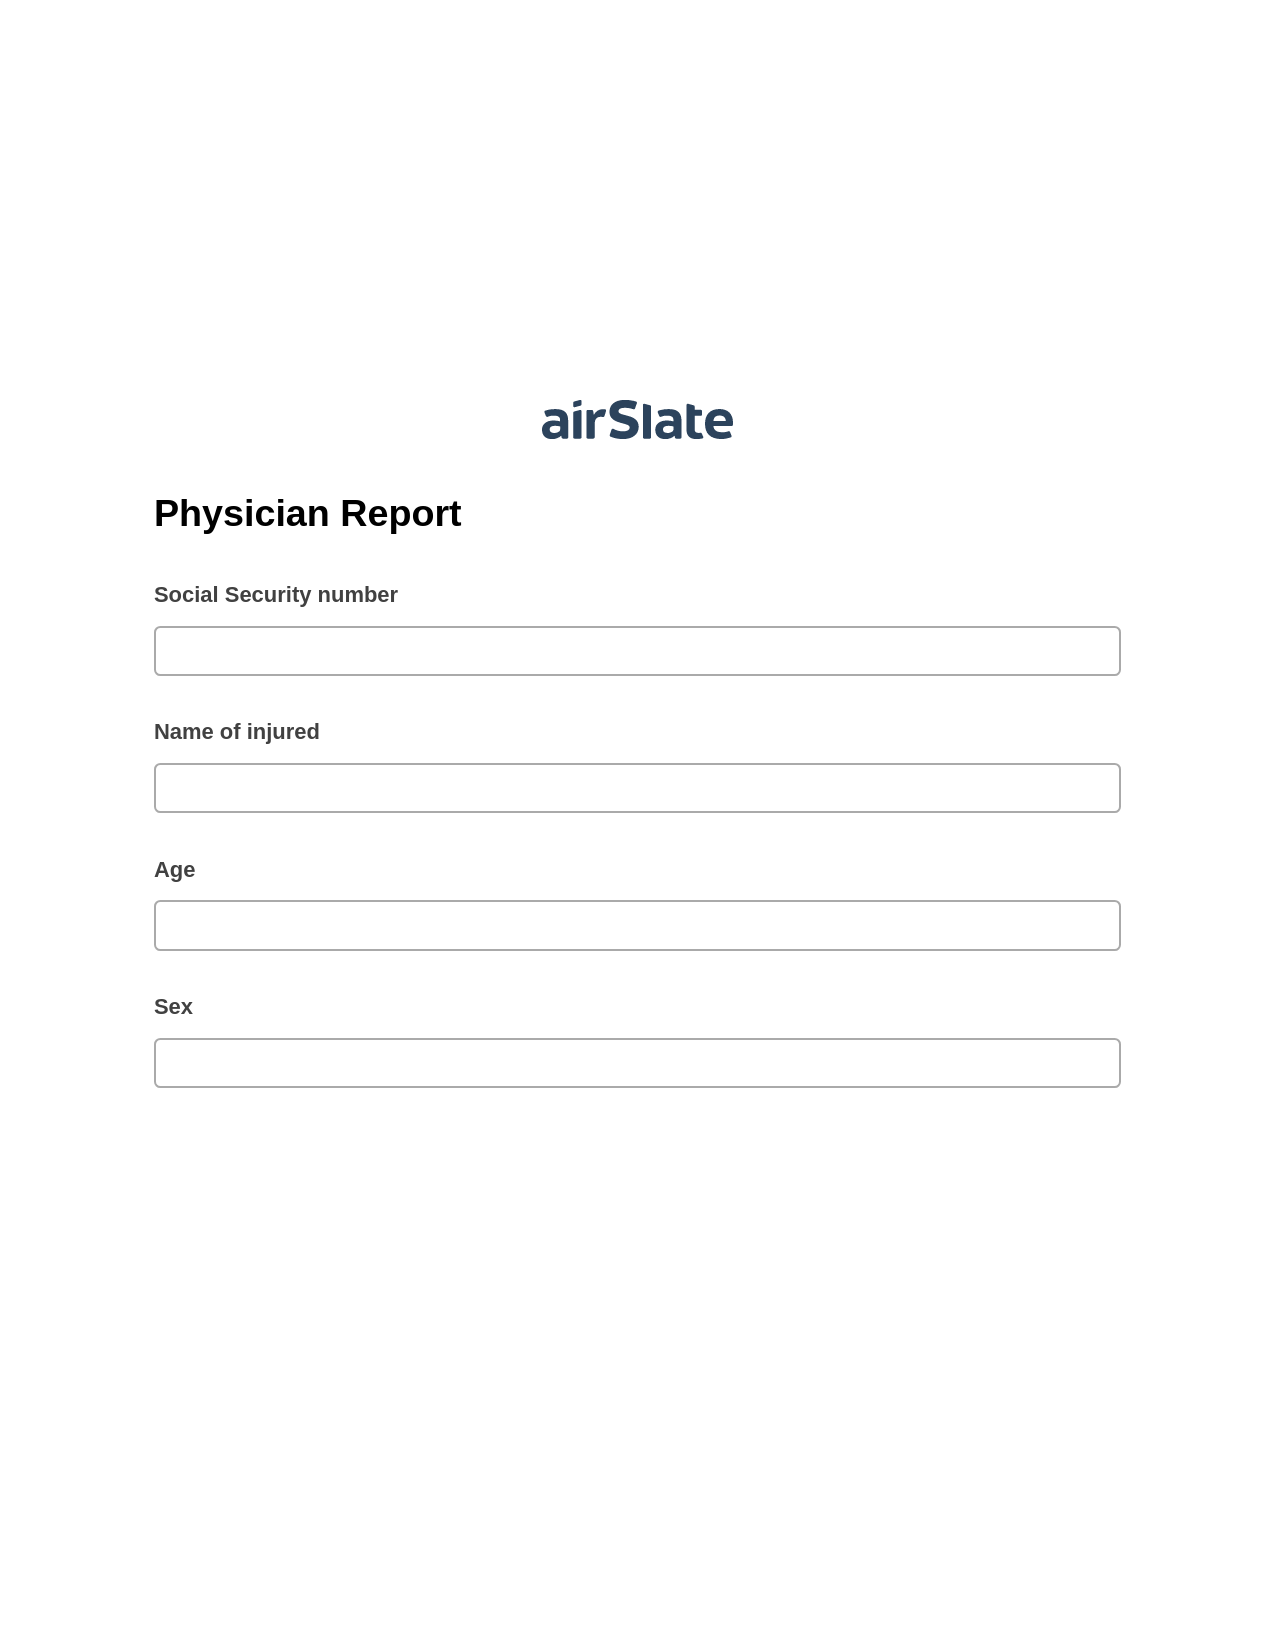 Physician Report Pre-fill from Excel Spreadsheet Bot, Create MS Dynamics 365 Records Bot, Archive to Box Bot